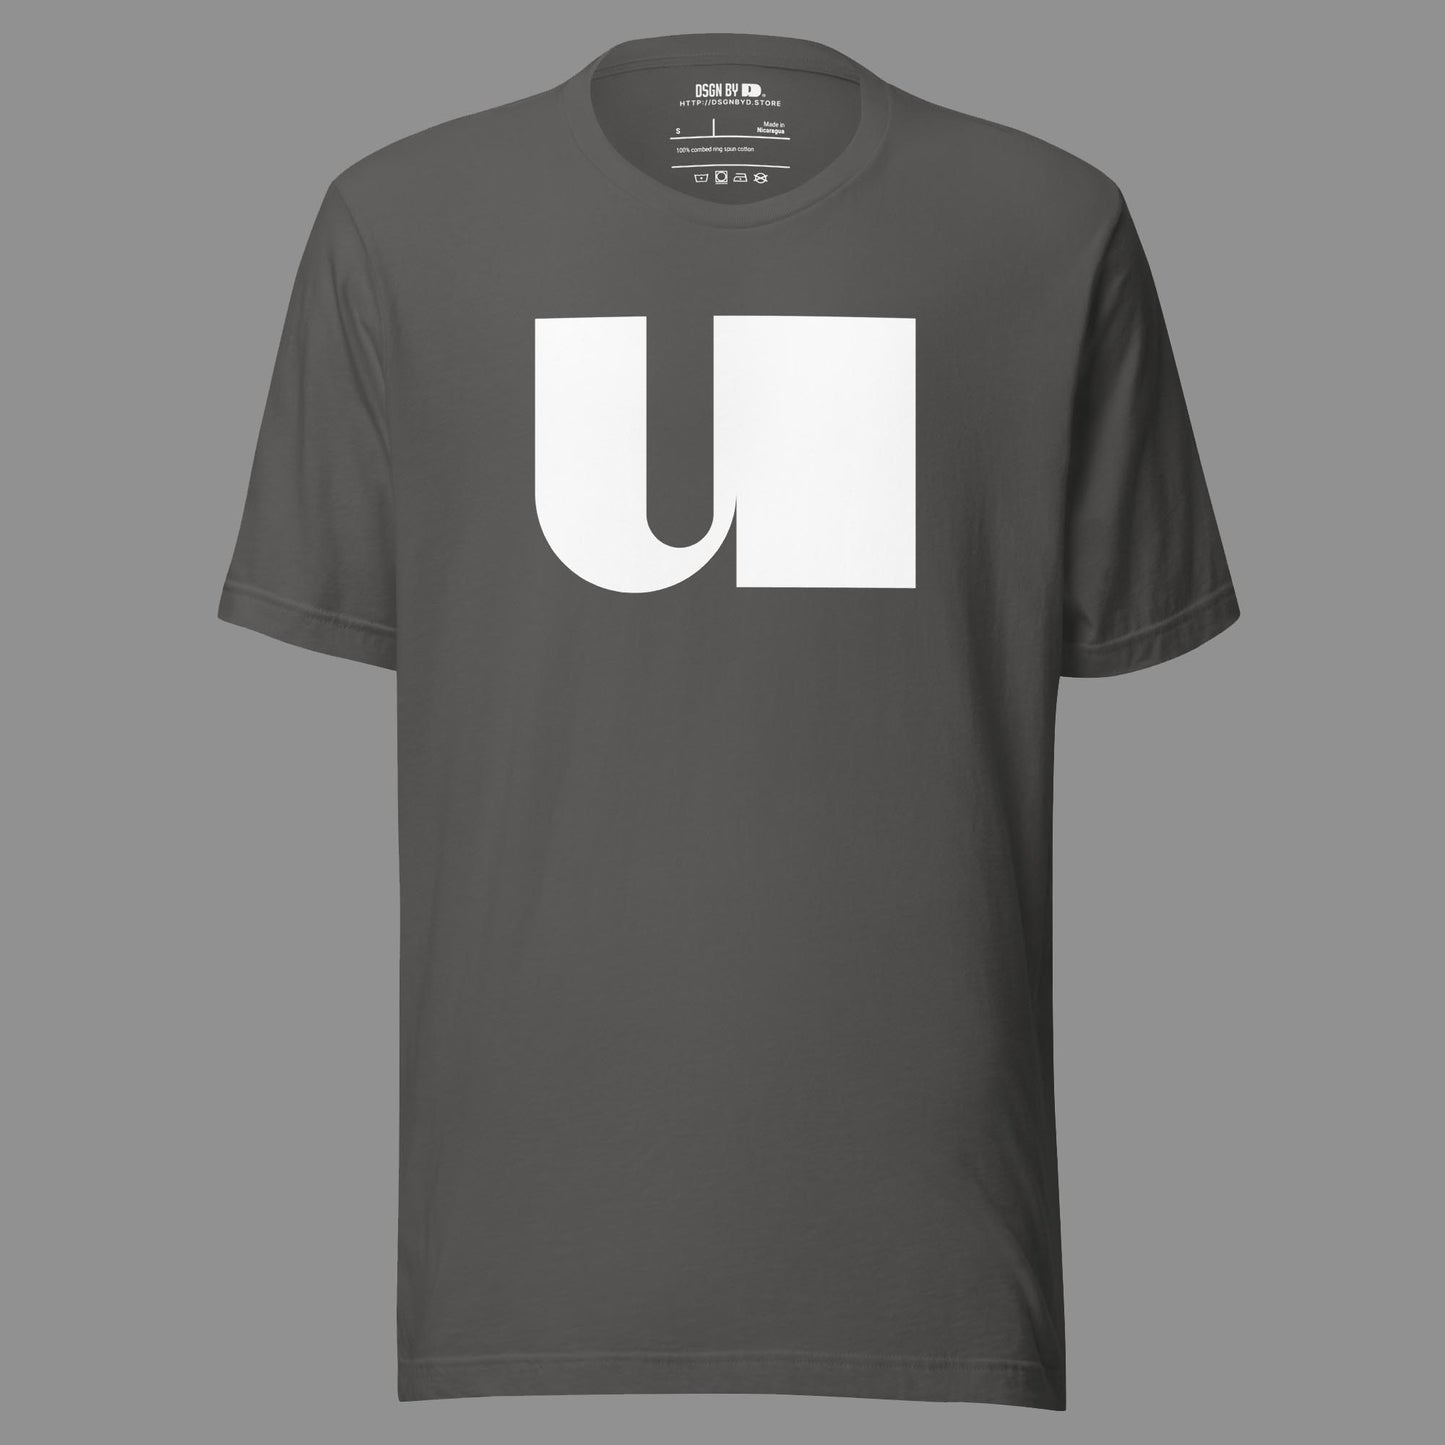 A grey cotton unisex graphic tee with letter U.